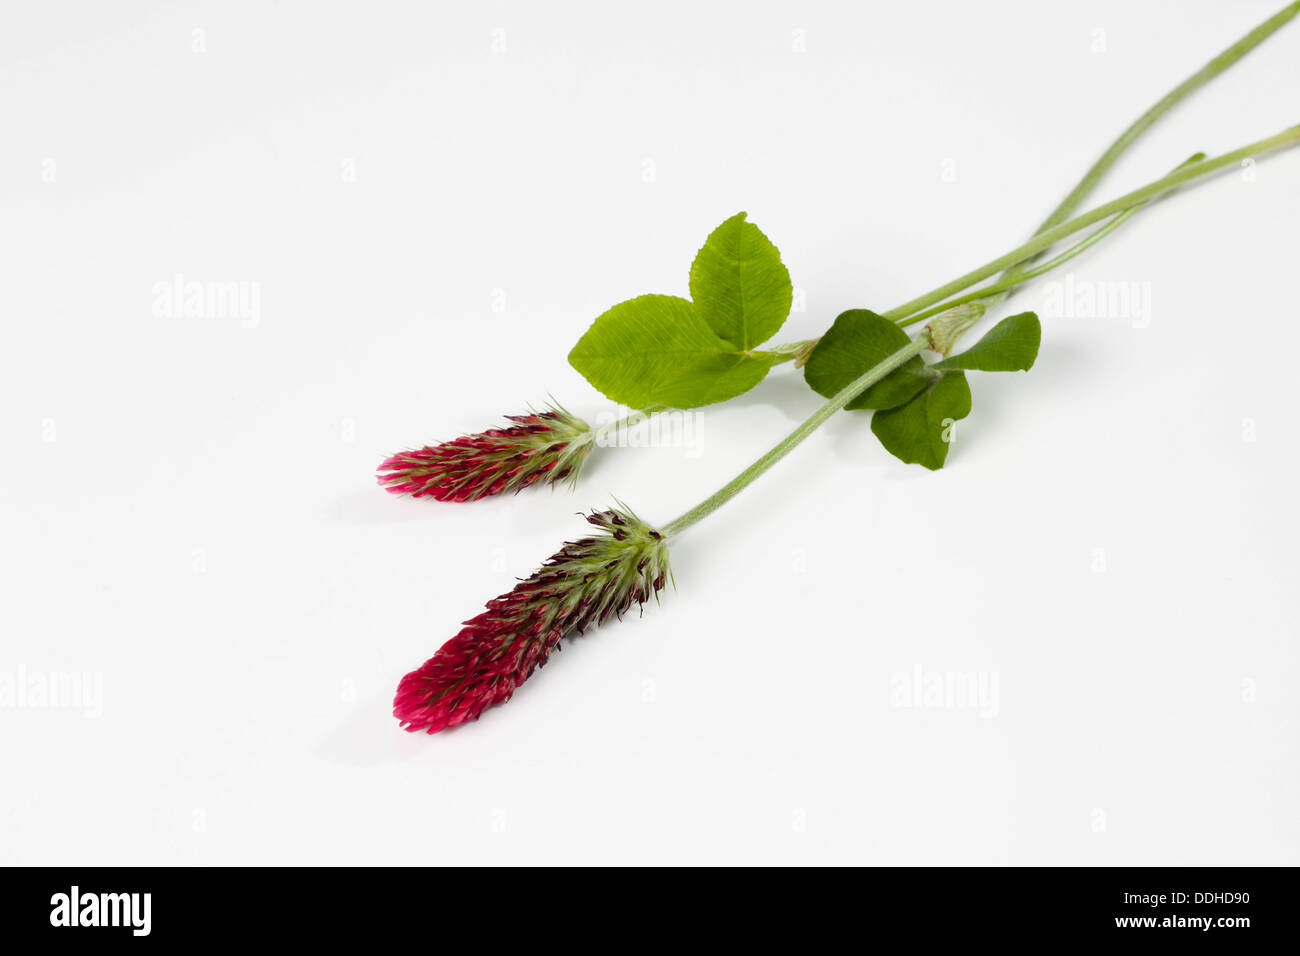 Red Trifoil flowers on white background, close up Stock Photo